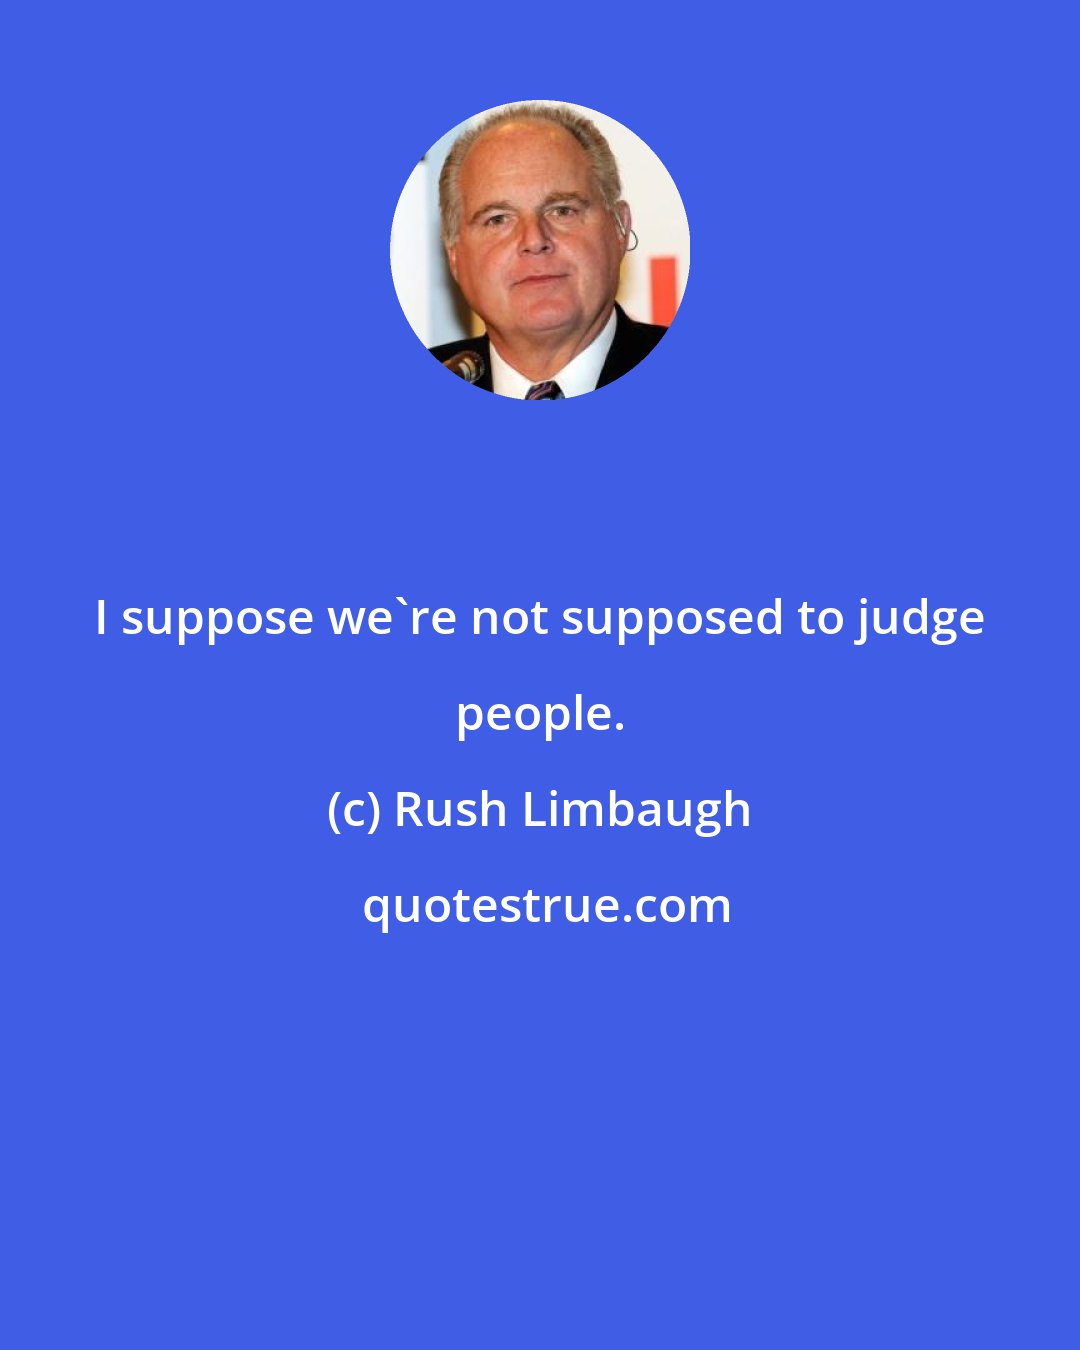 Rush Limbaugh: I suppose we're not supposed to judge people.